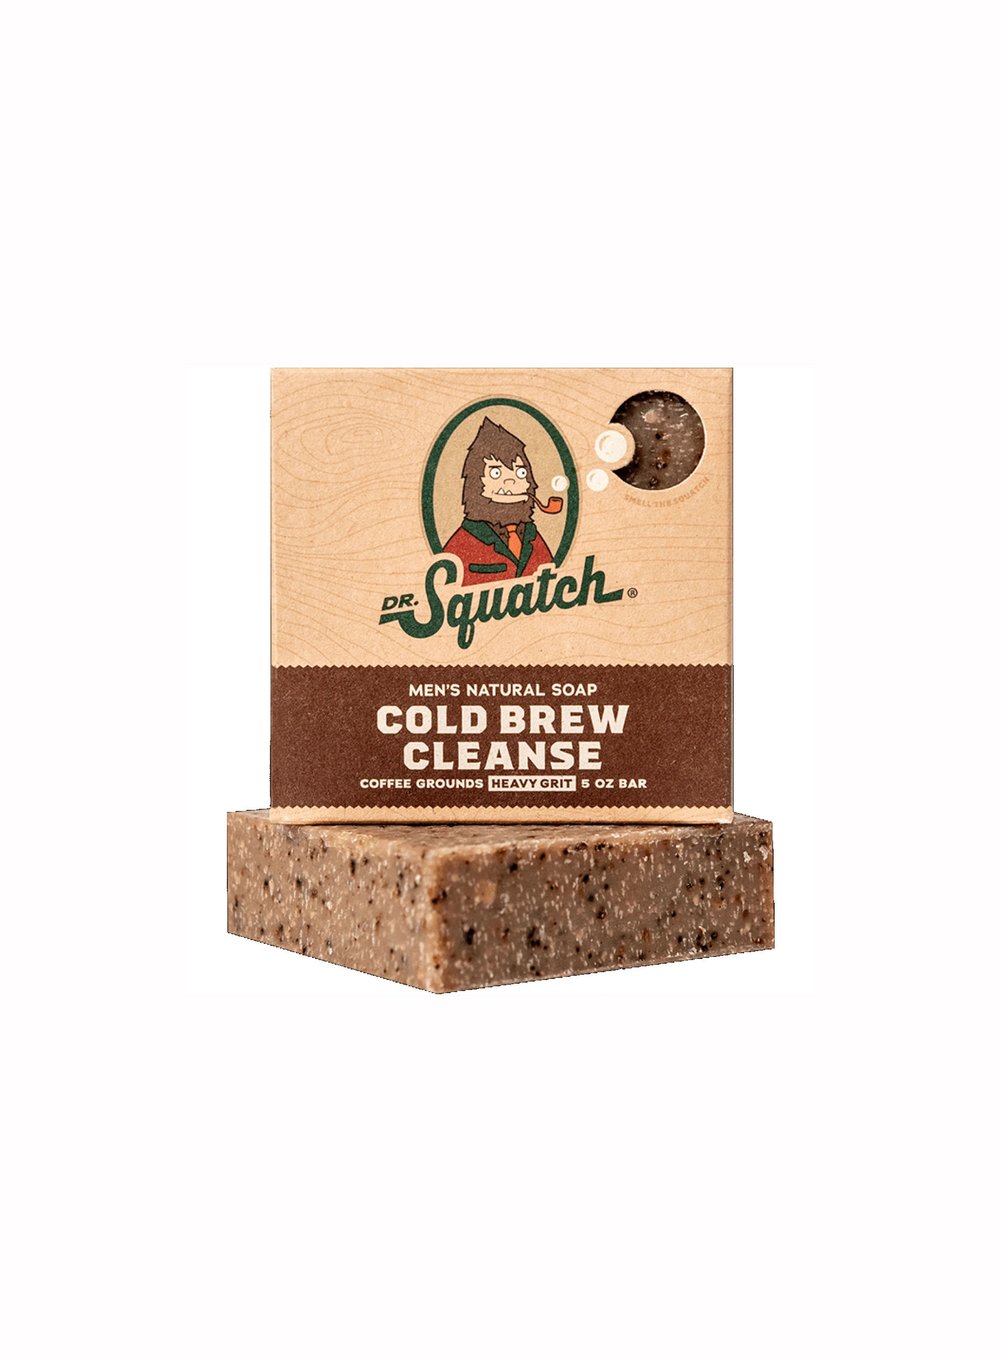 DR. SQUATCH BAR SOAP - COLD BREW CLEANSE, FREE SHIPPING